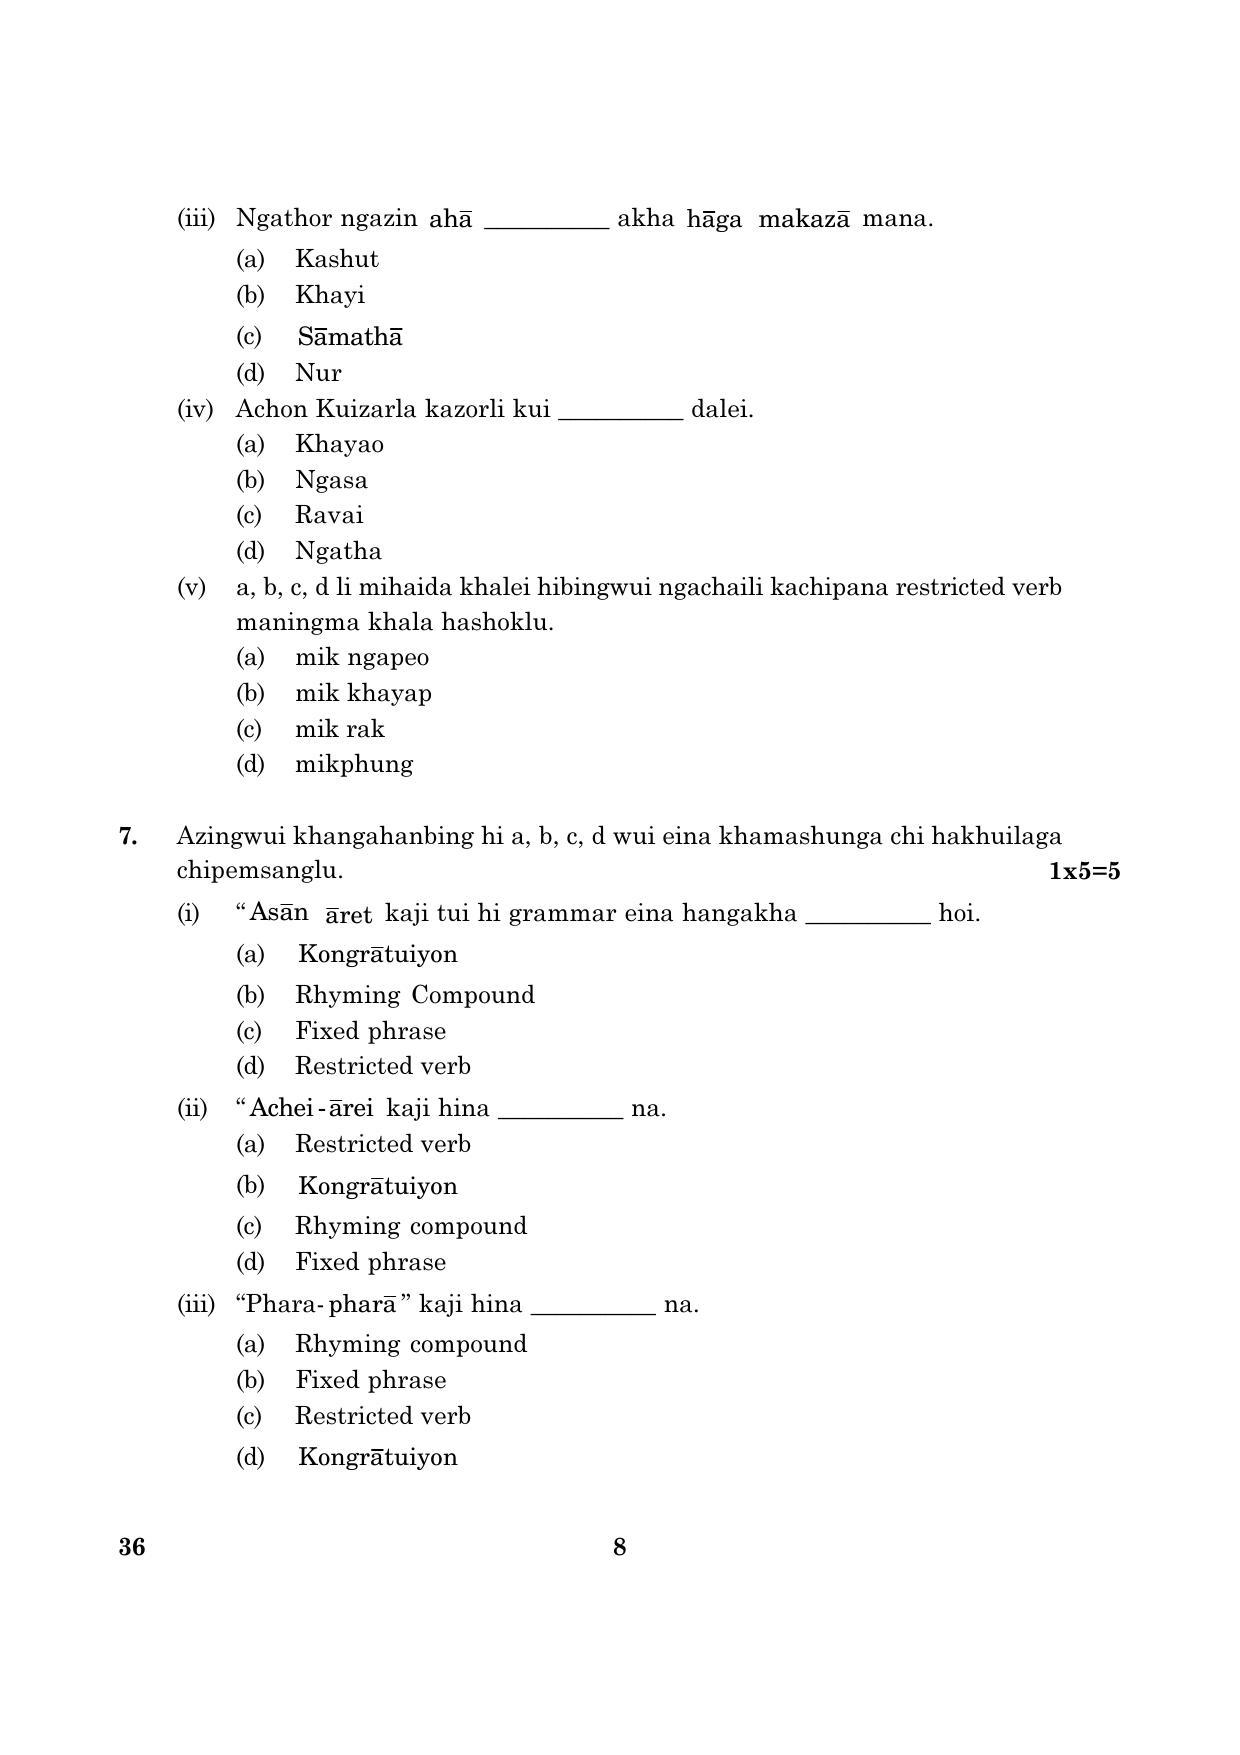 CBSE Class 10 036 Tangkhul (English) 2016 Question Paper - Page 8